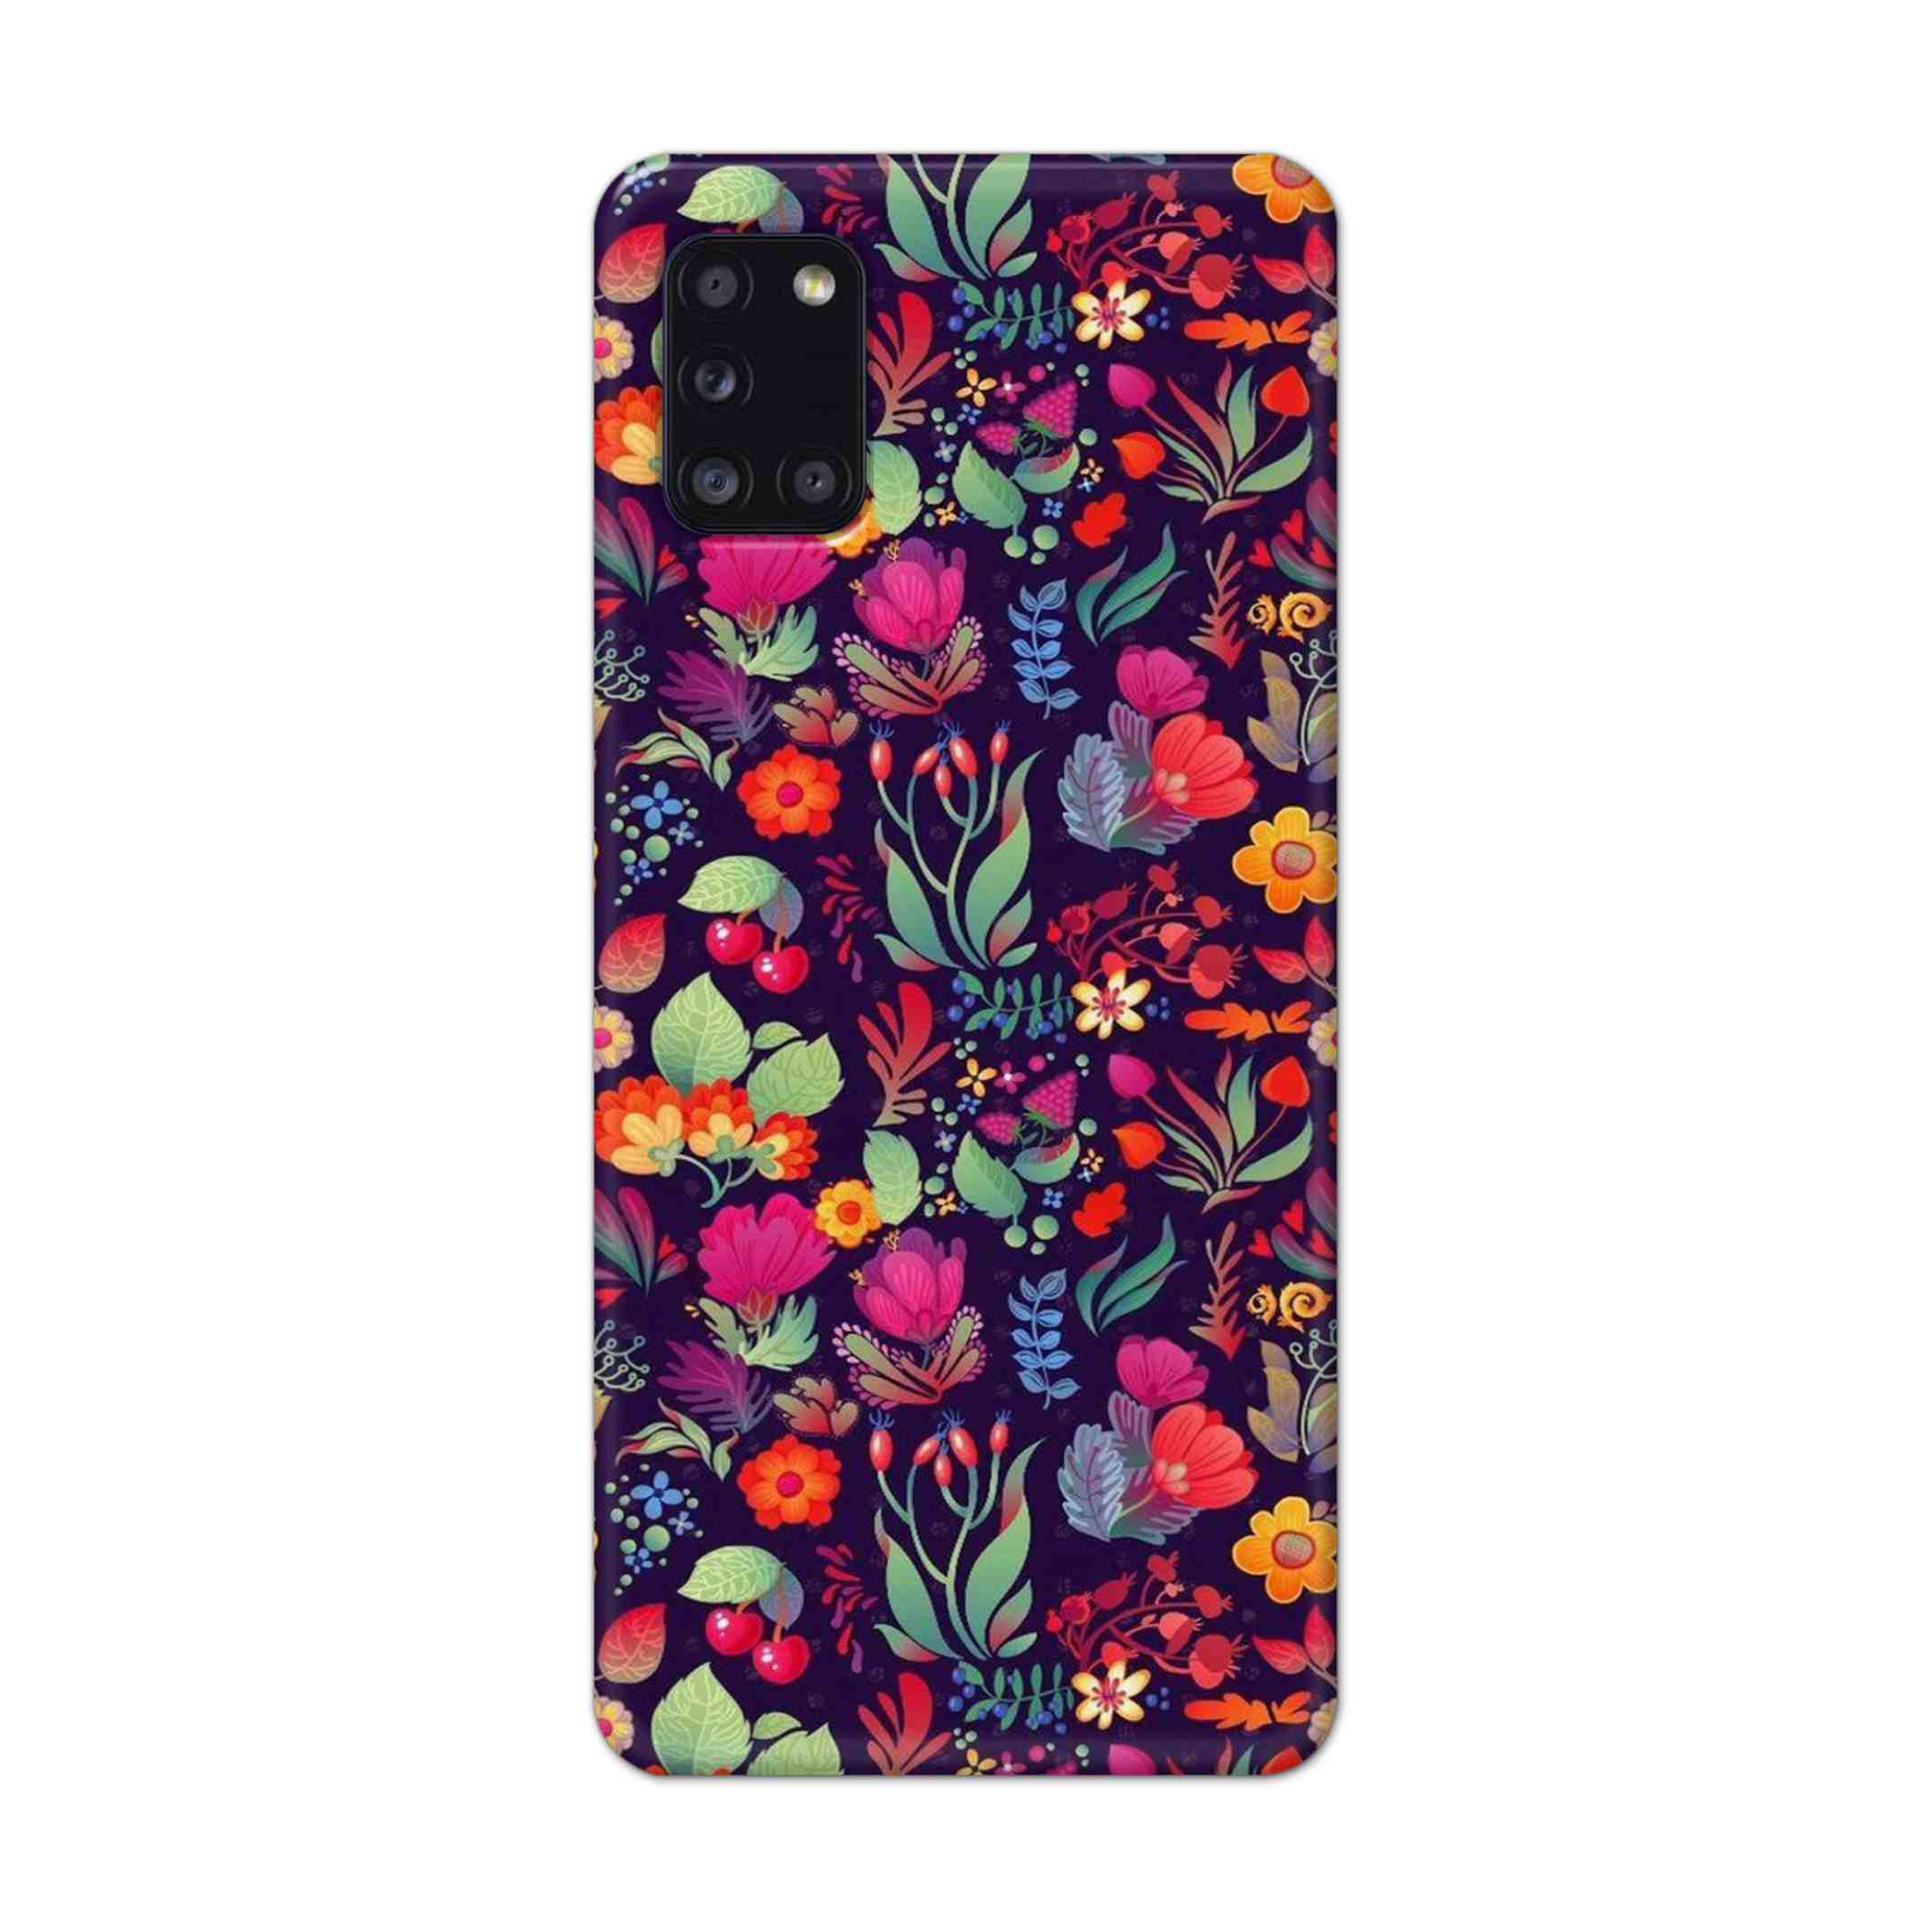 Buy Fruits Flower Hard Back Mobile Phone Case Cover For Samsung Galaxy A31 Online